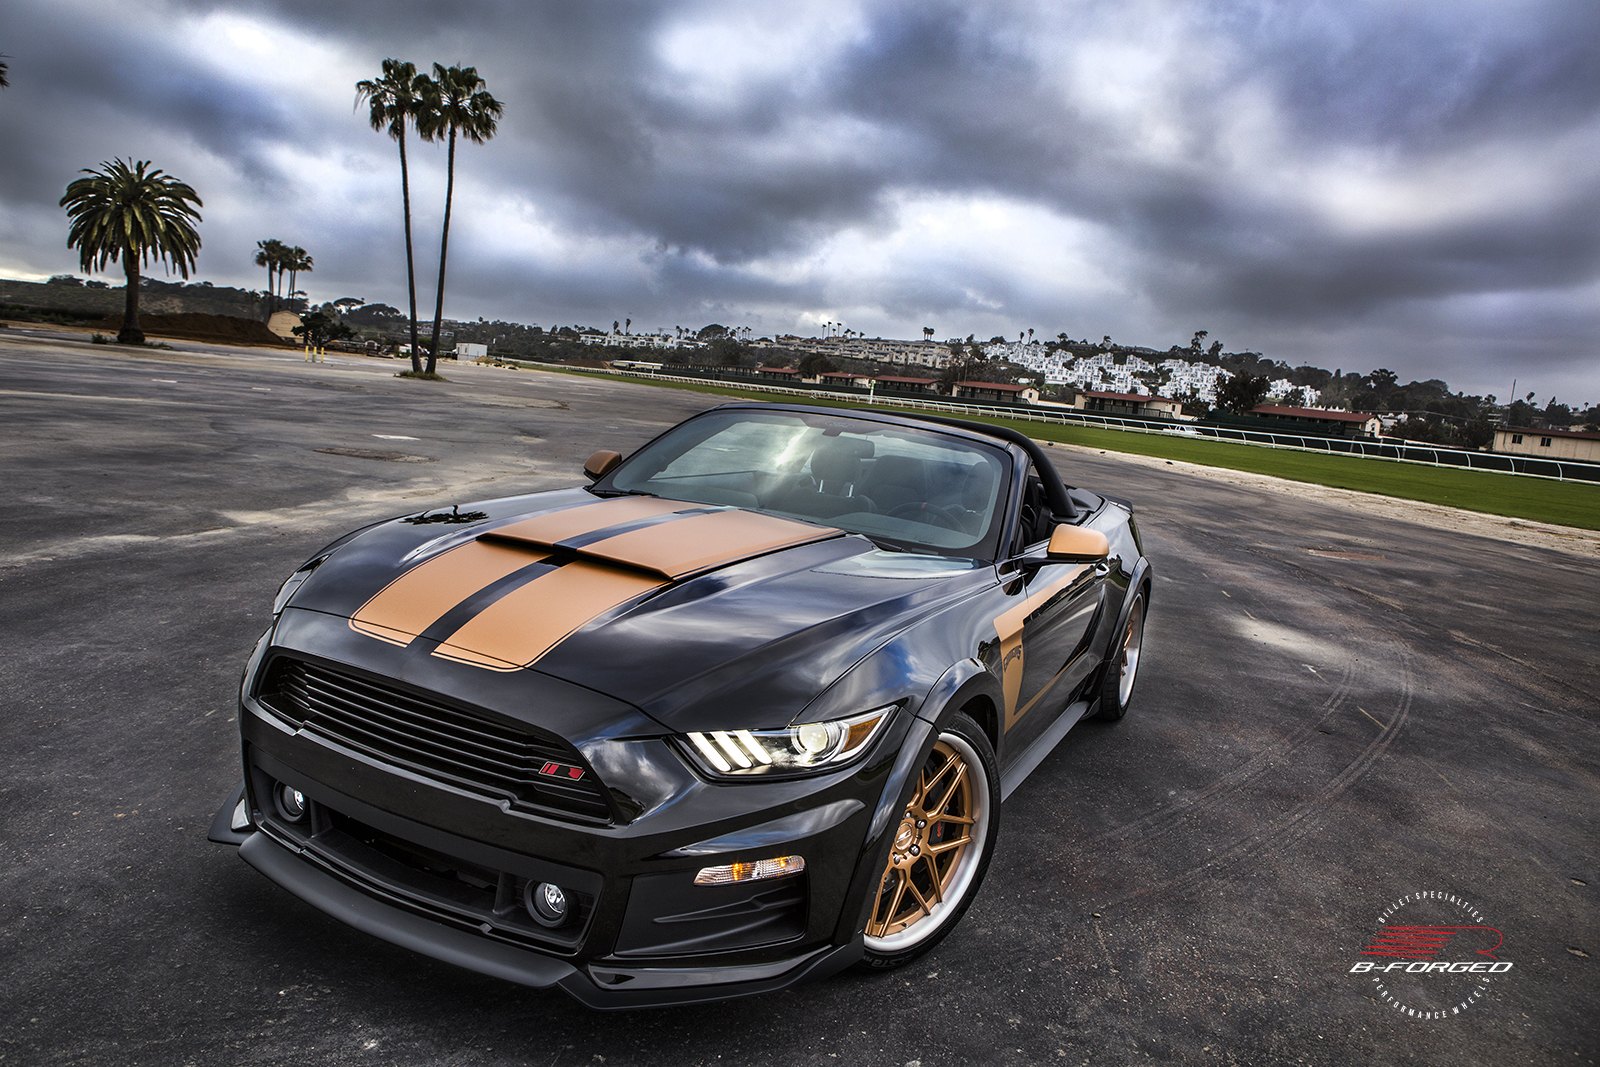 Black Convertible Ford Mustang with Beige Accents - Photo by B-Forged Performance Wheels